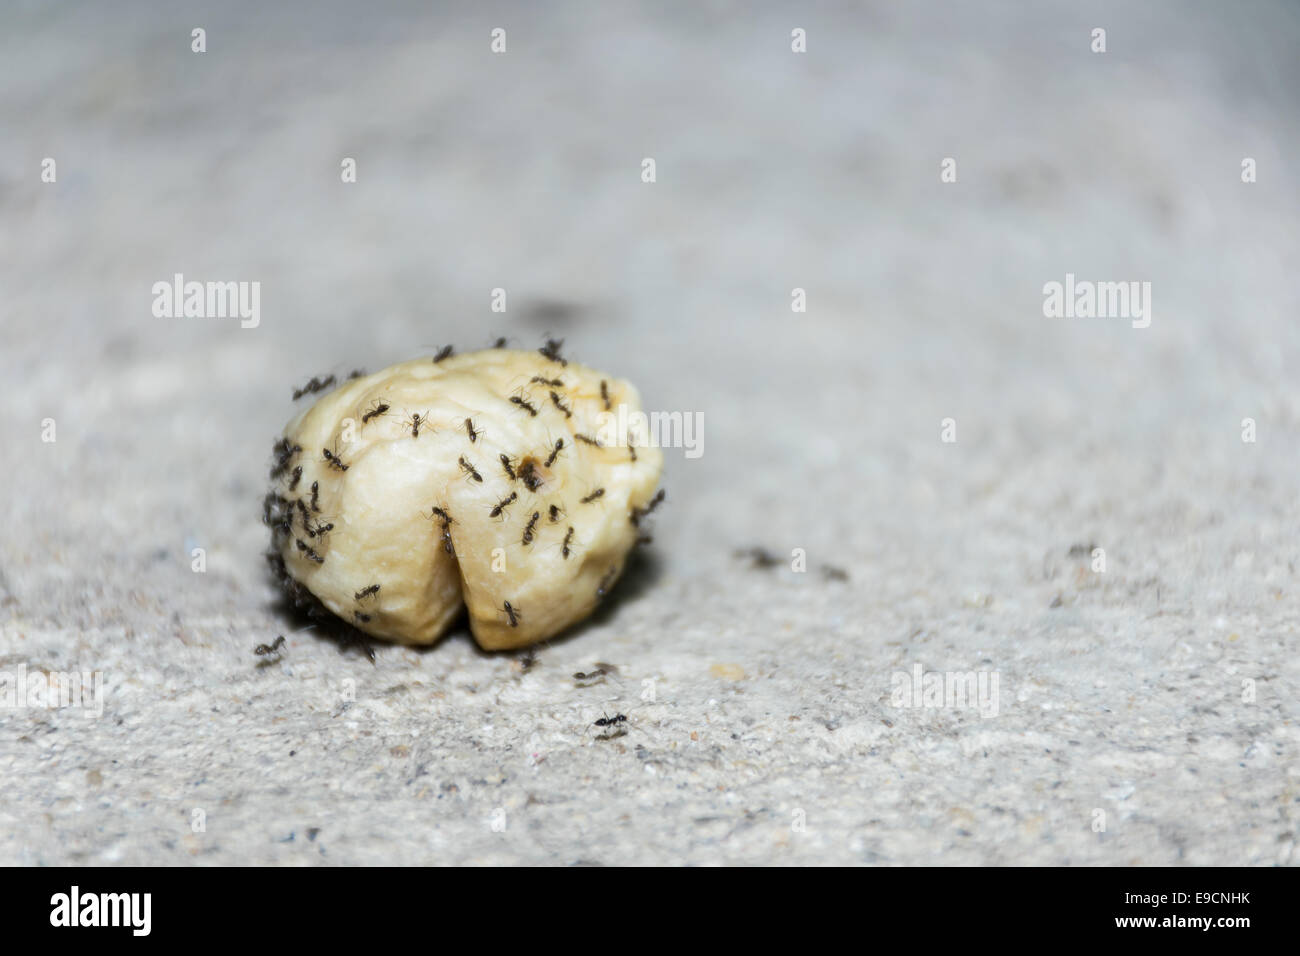 team of Ants on meat ball working Stock Photo